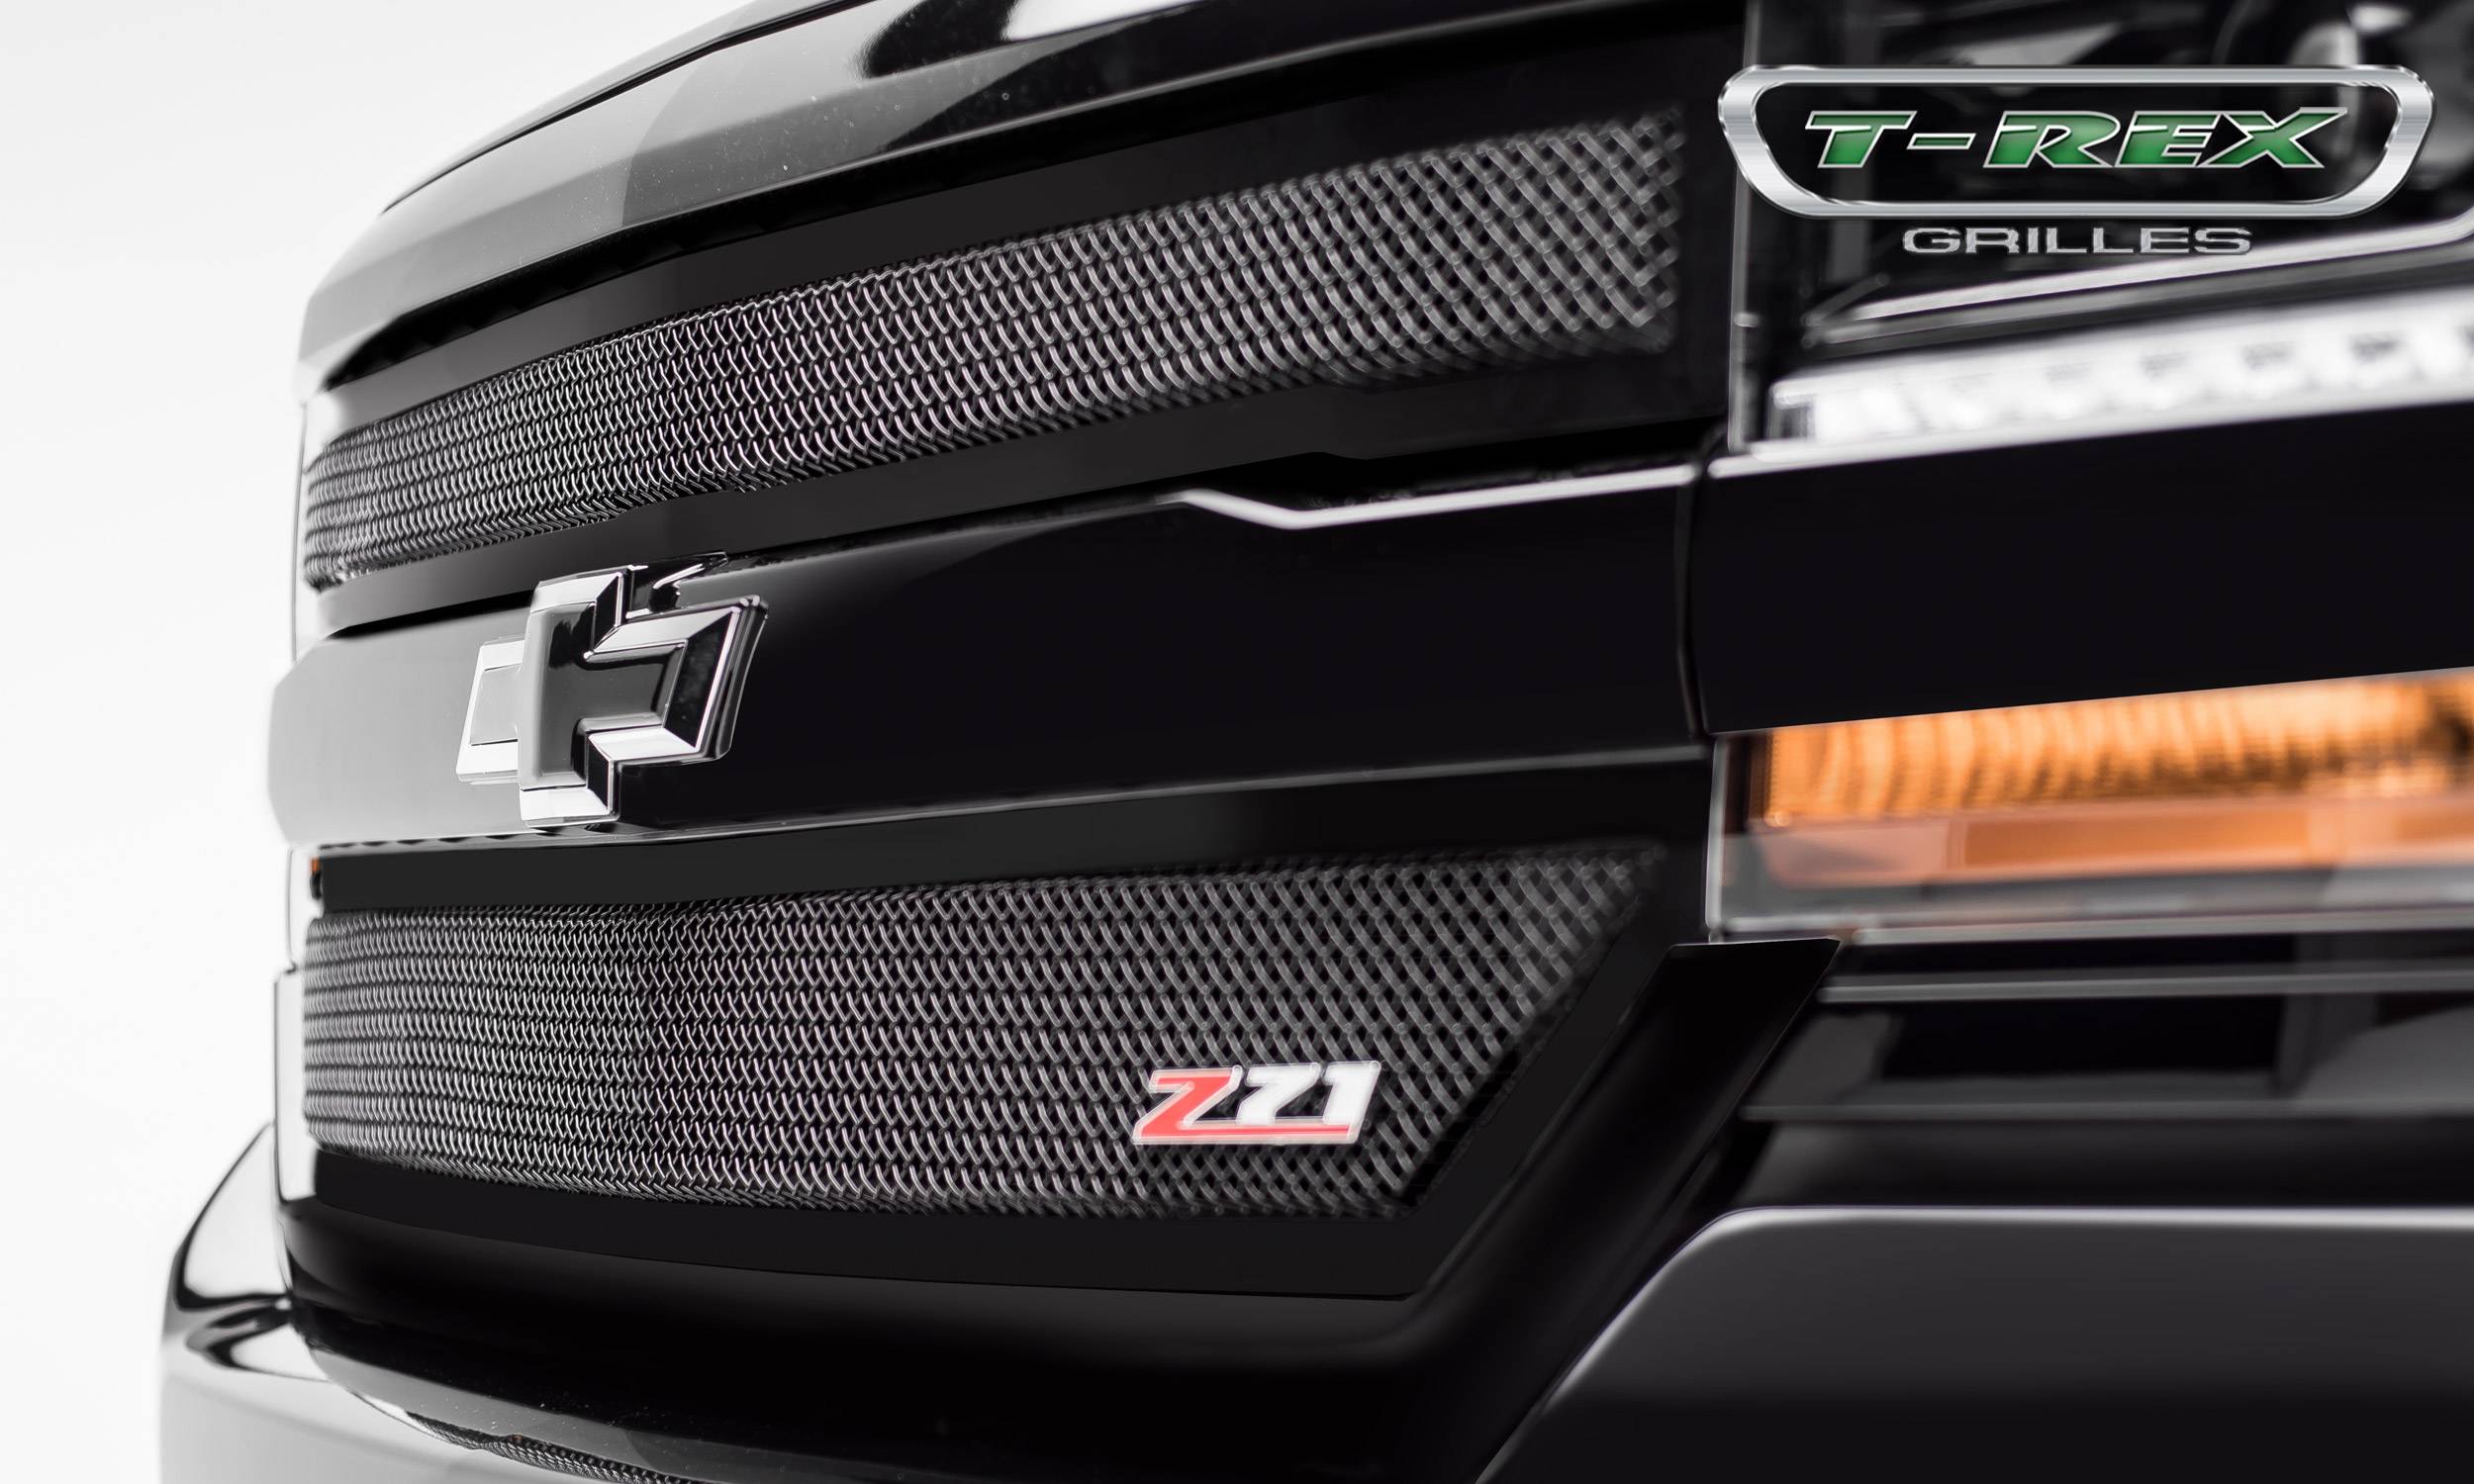 T-REX Grilles - 2016-2018 Chevrolet Silverado 1500 Z71 Upper Class Series, Powder Coated Black, 2 Pc Main Grille Insert - Fits Z71 Only - Pt # 51124